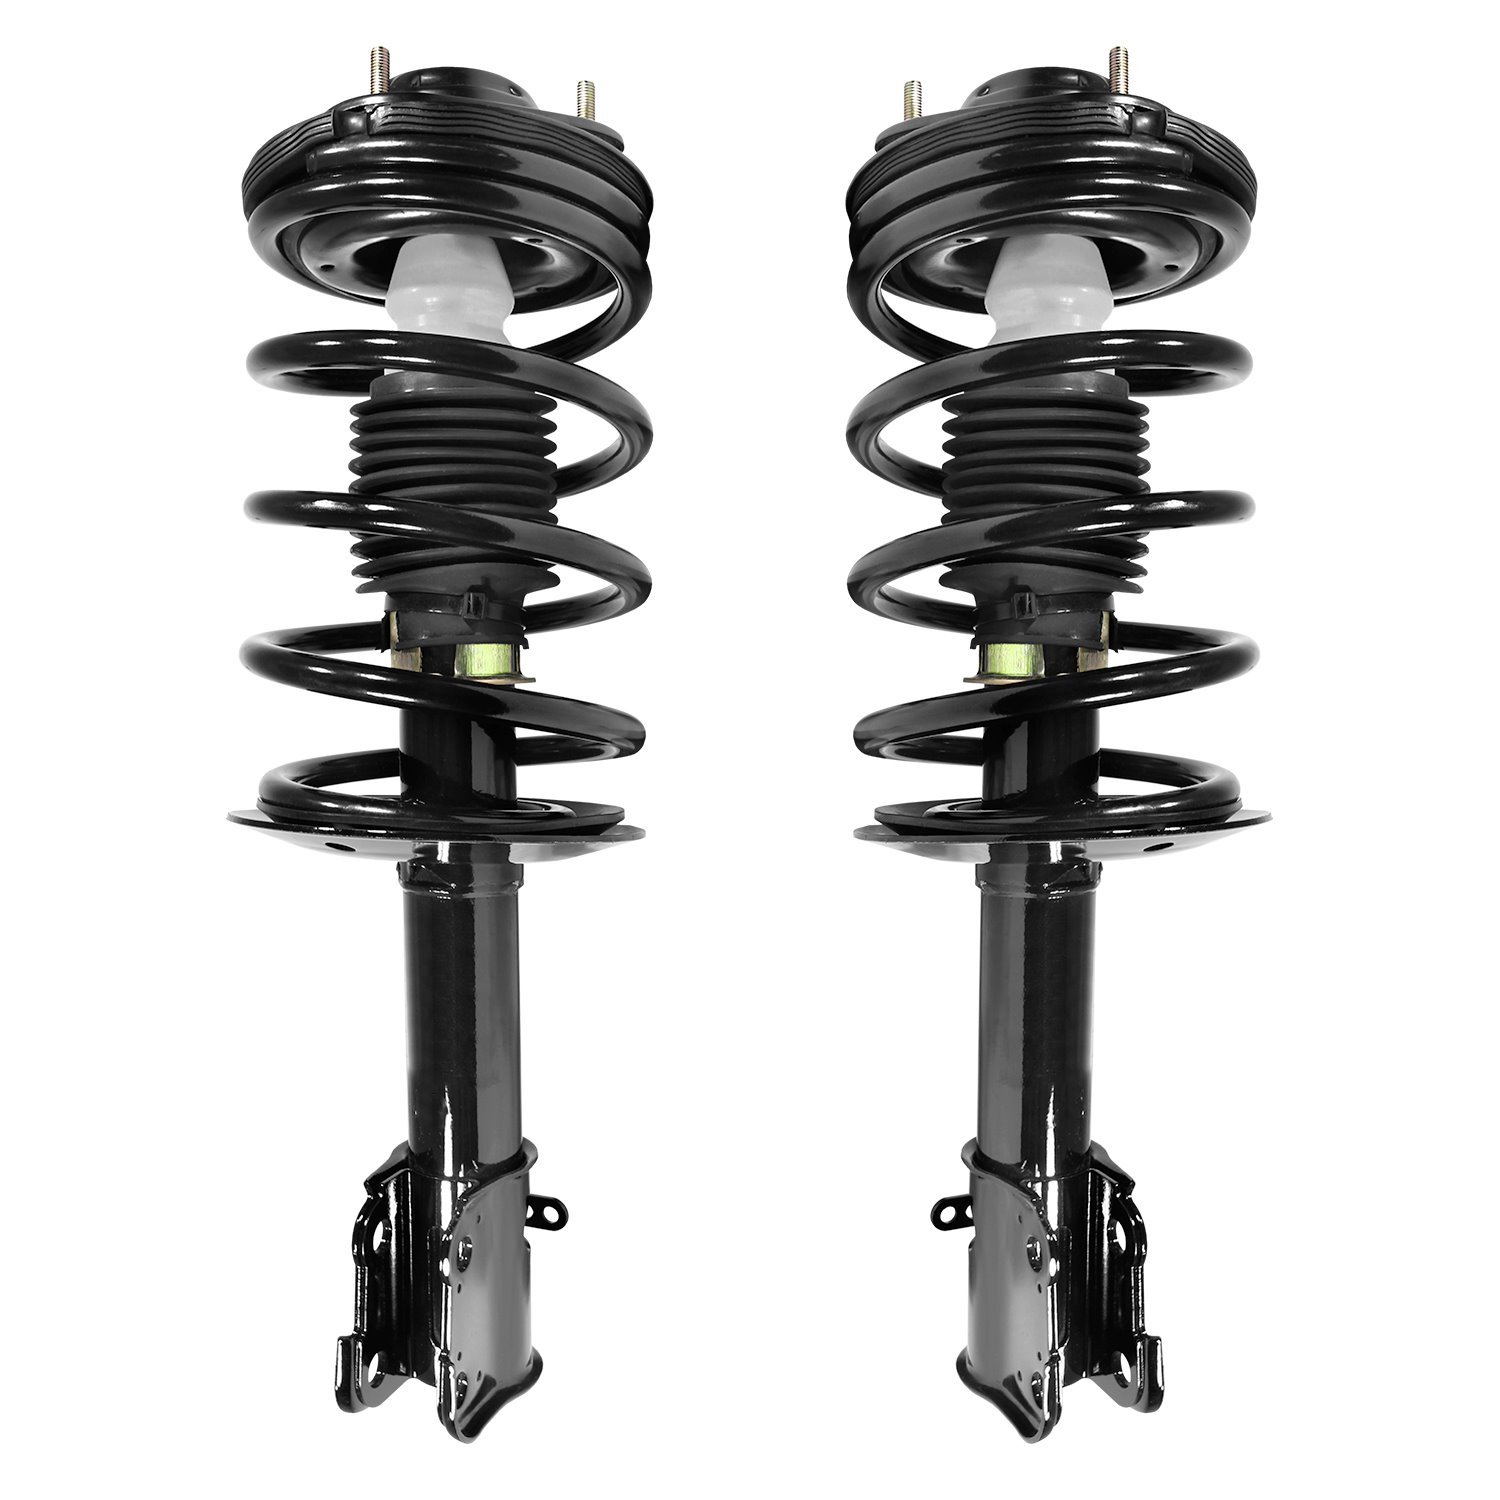 2-11350-001 Suspension Strut & Coil Spring Assembly Set Fits Select Chrysler Neon, Dodge Neon, Dodge SX 2.0, Plymouth Neon